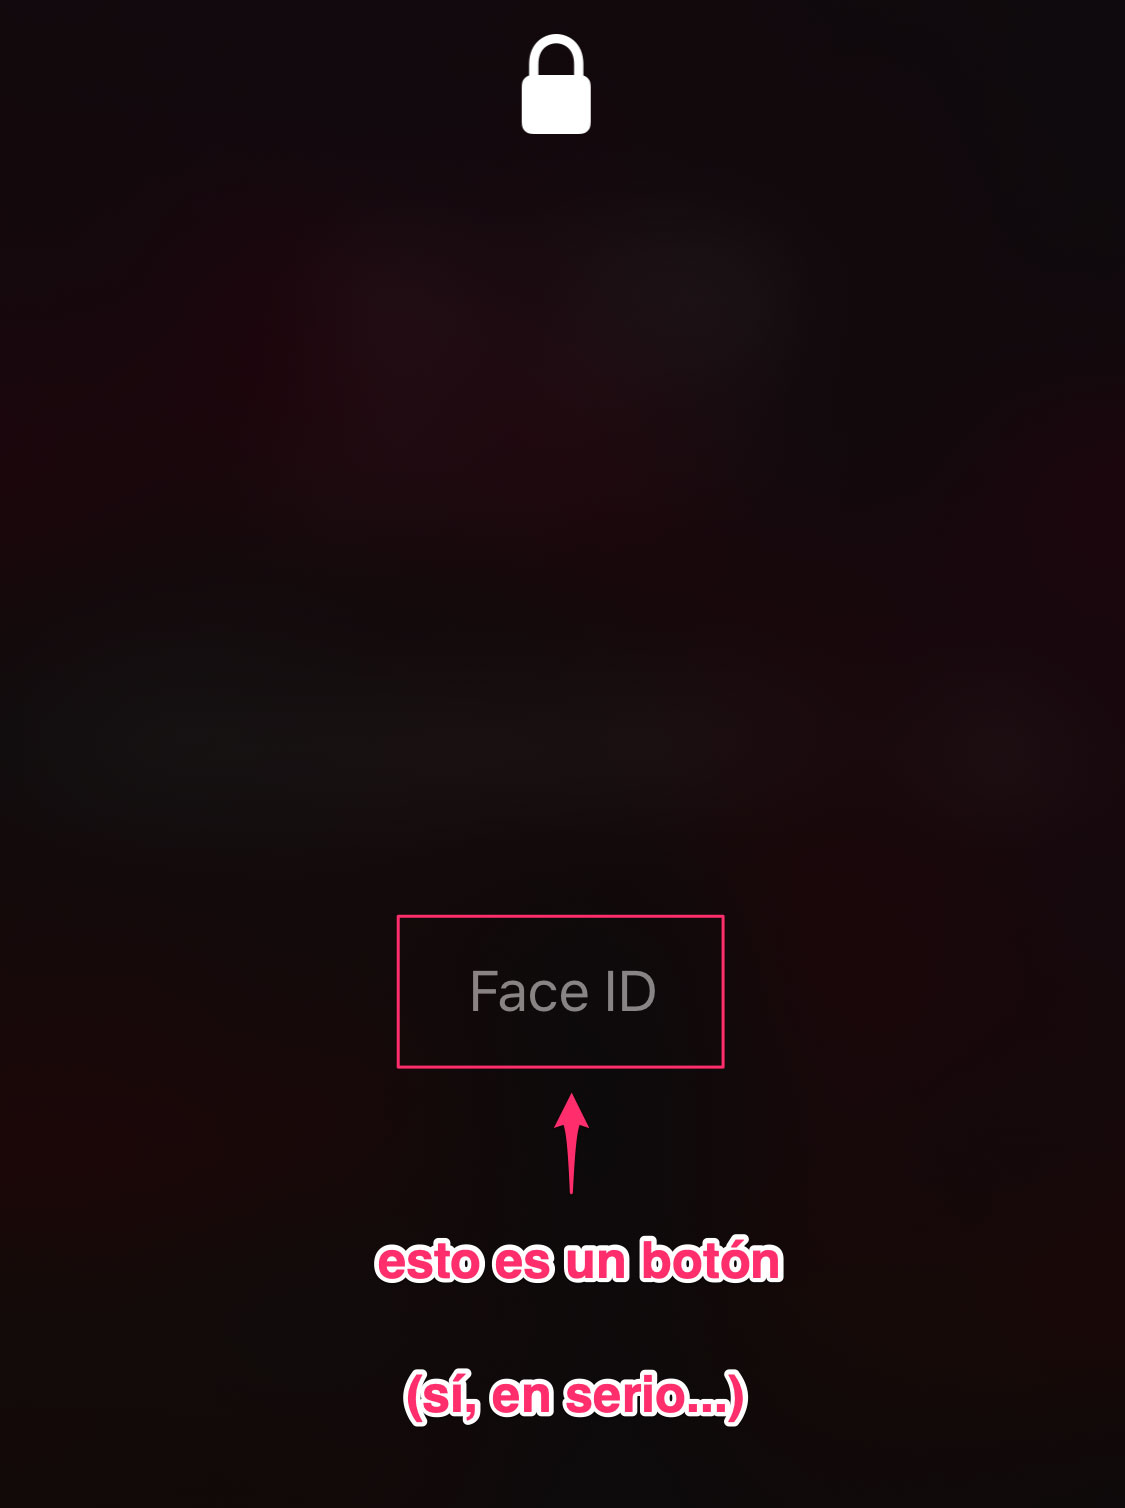 Face ID button to enter the password by typing